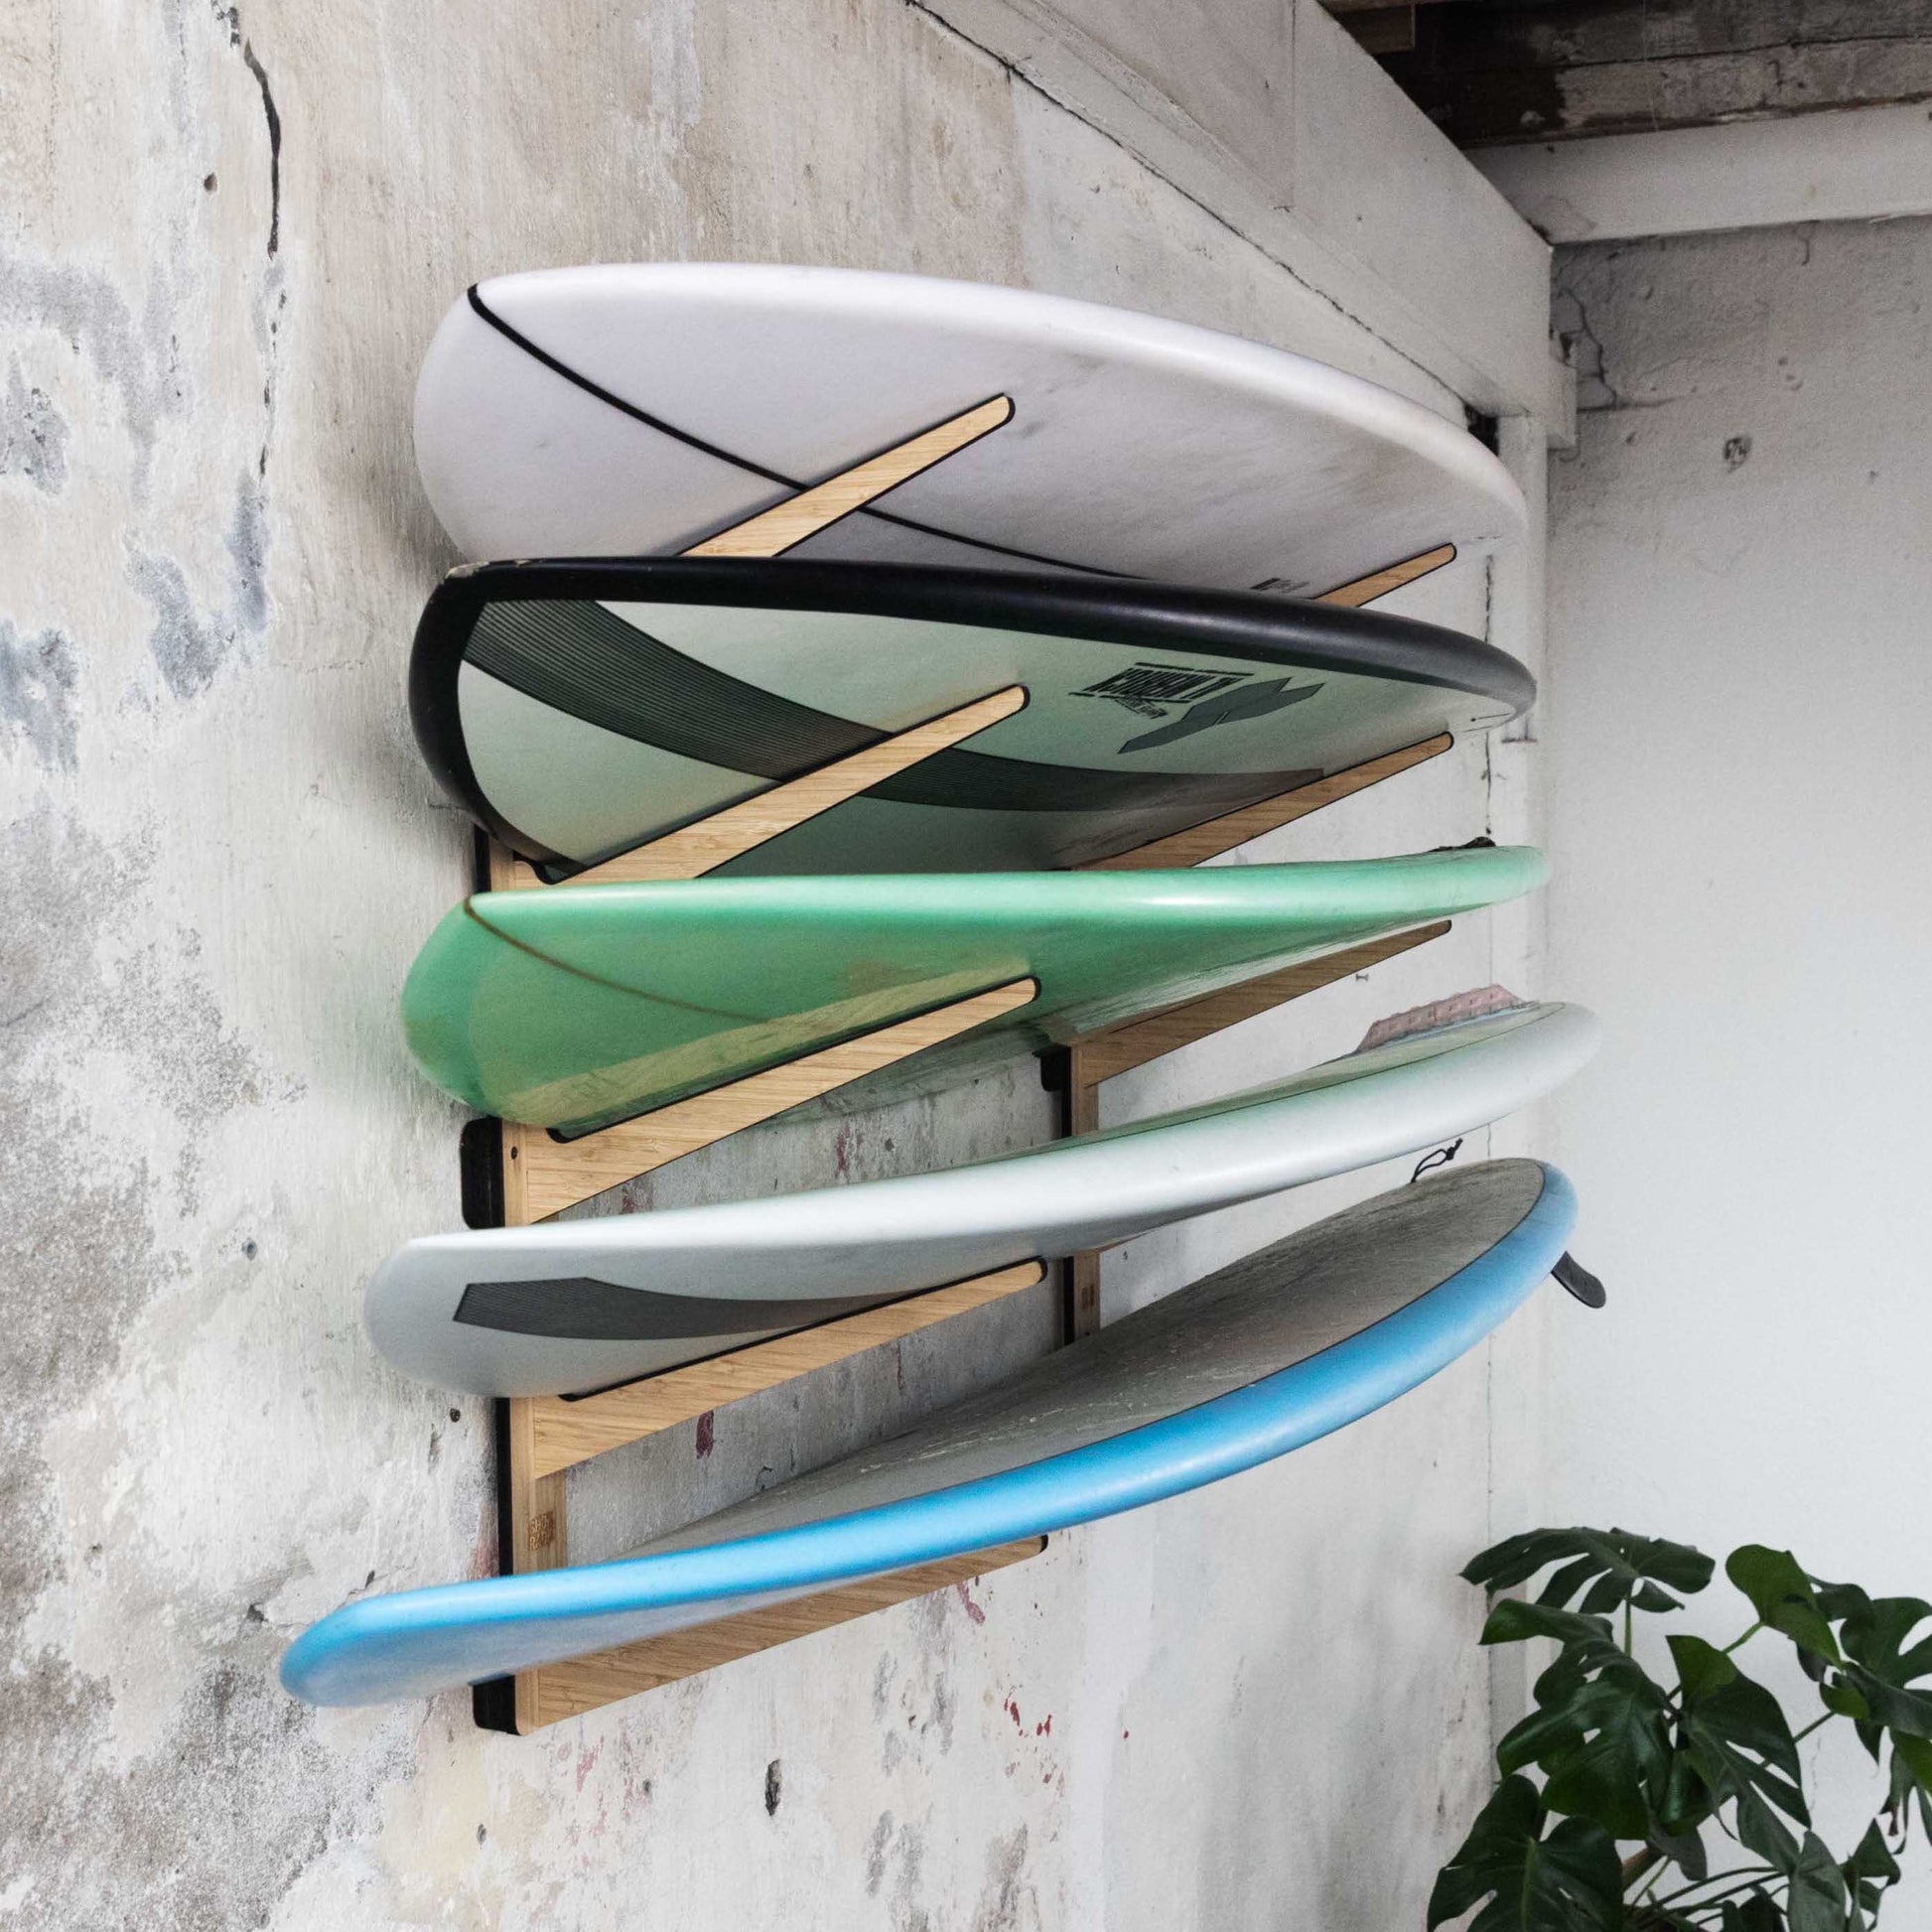 SHCK RACK The Stacker horizontal multi 5 surfboard rack with boards side view